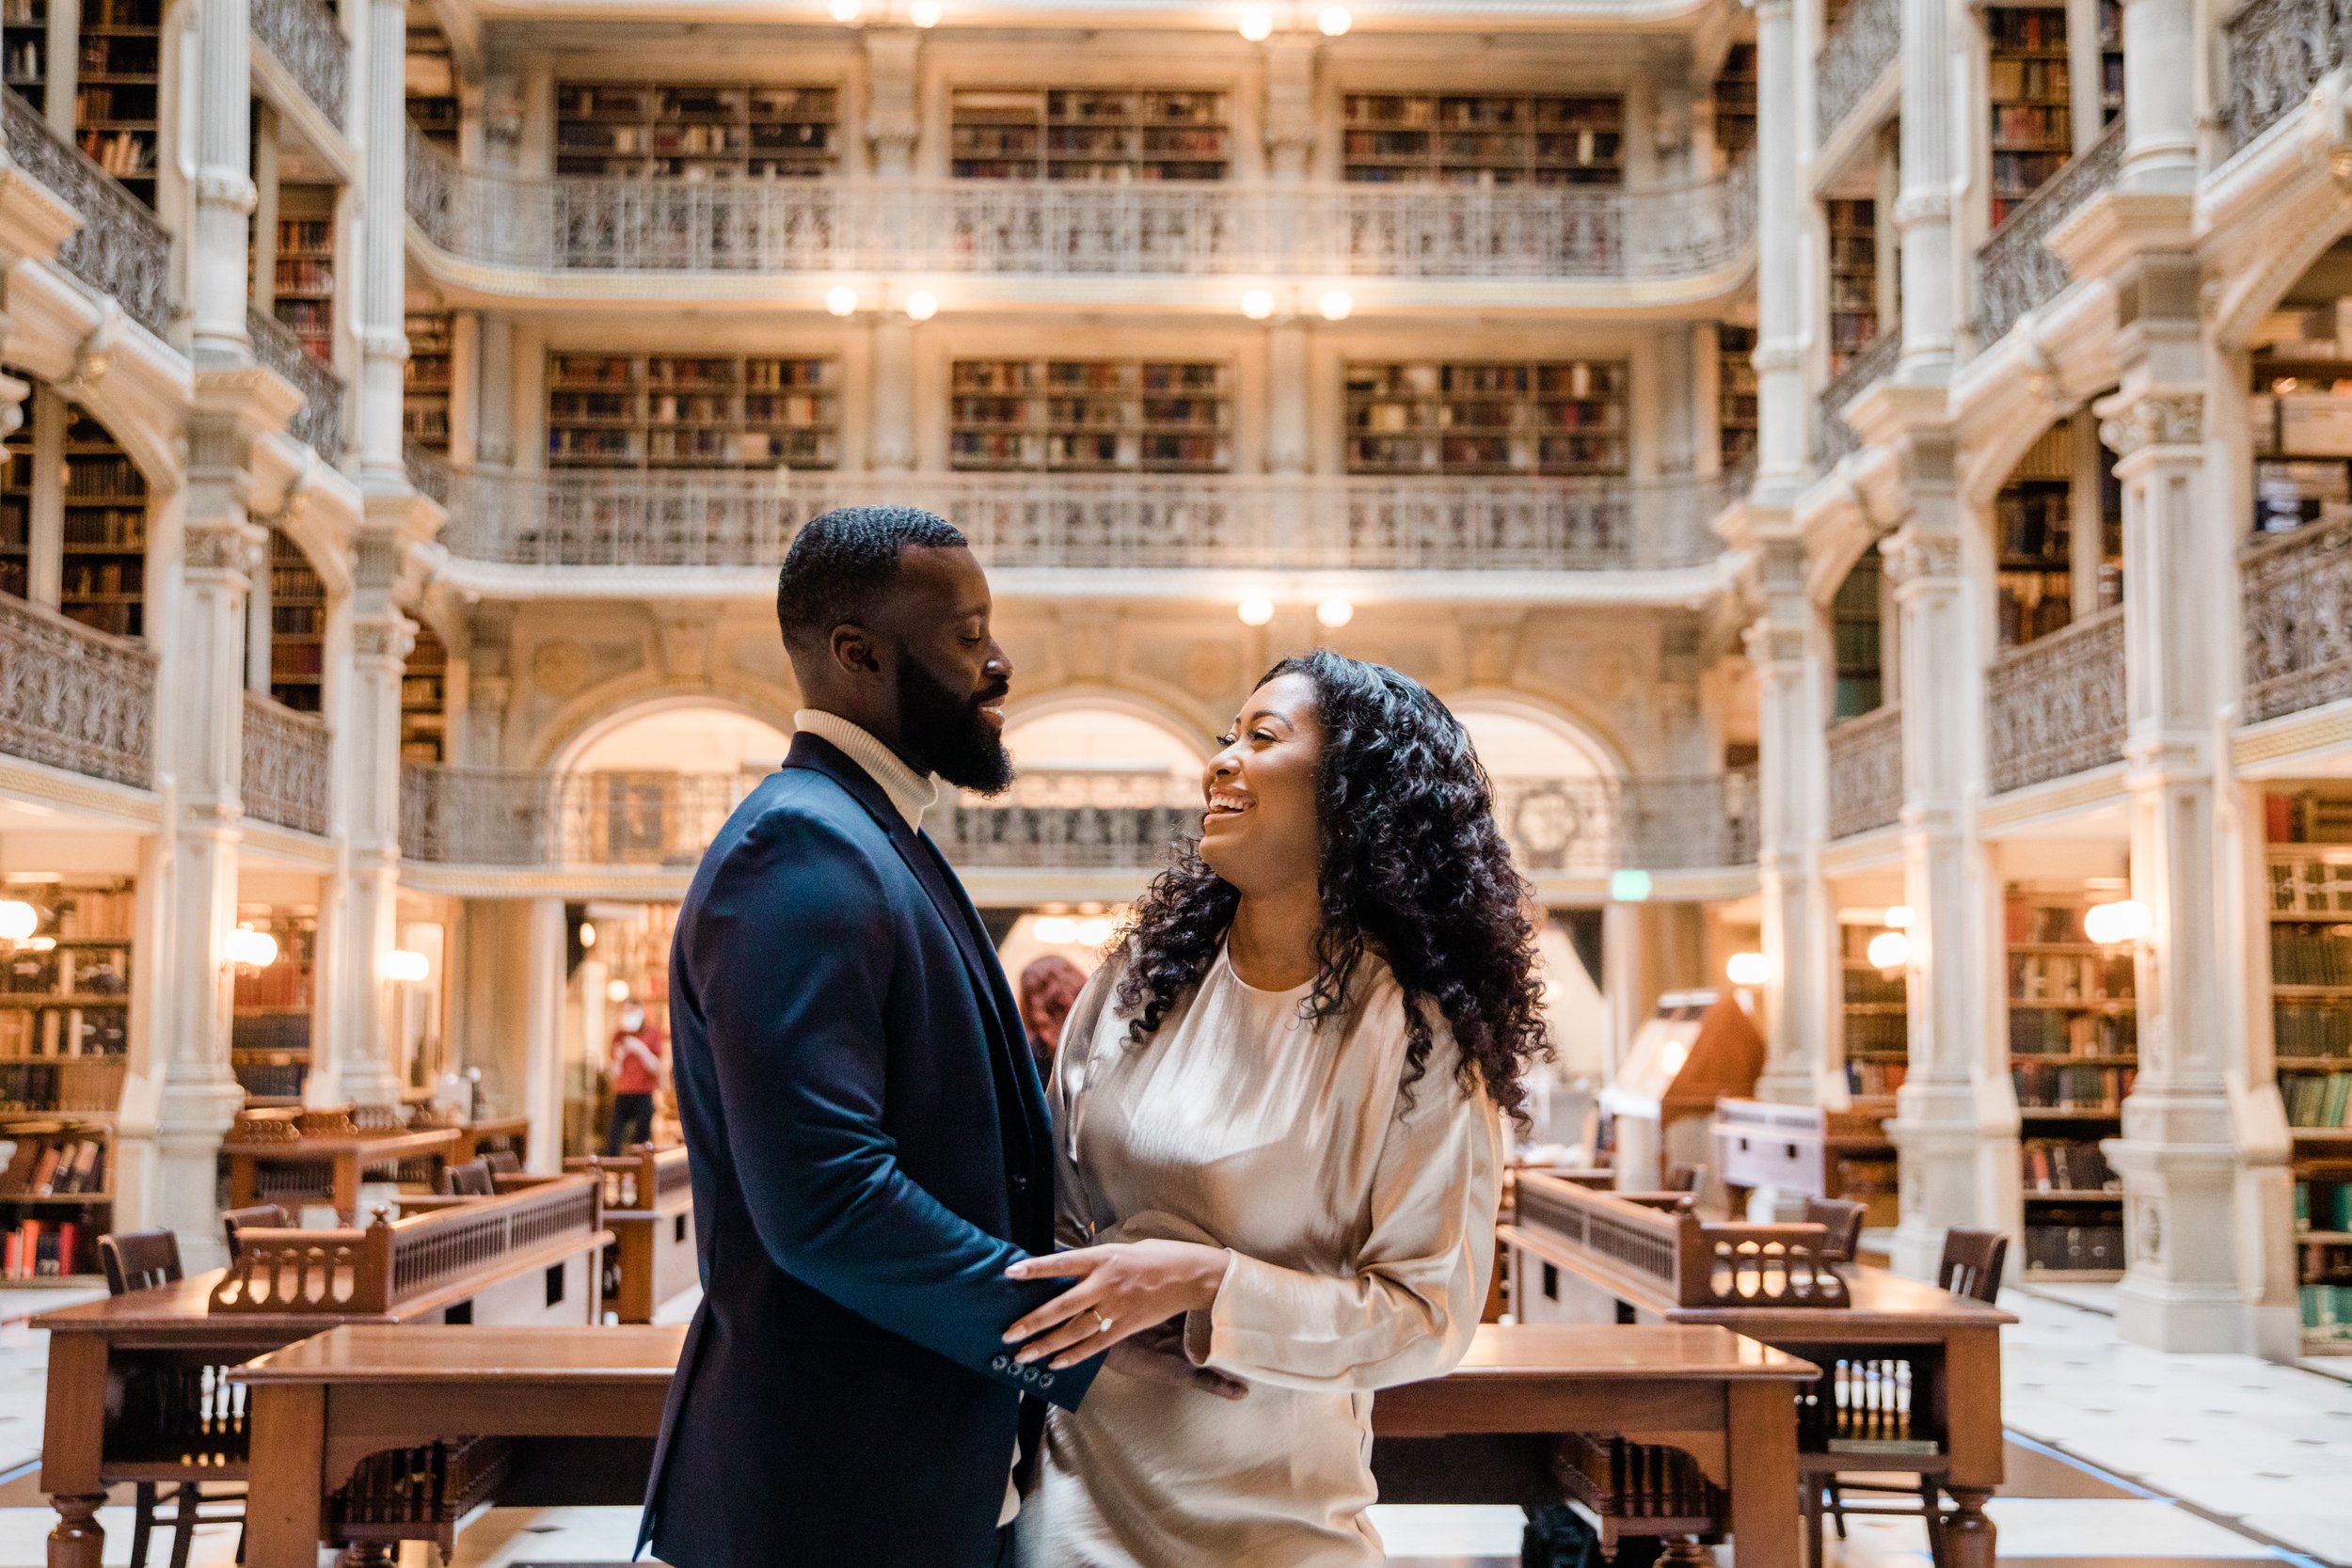 Disney Beauty and The Beast Inspired Engagement Session at The Peabody Library Baltimore Maryland shot by Megapixels Media Photography-15.jpg